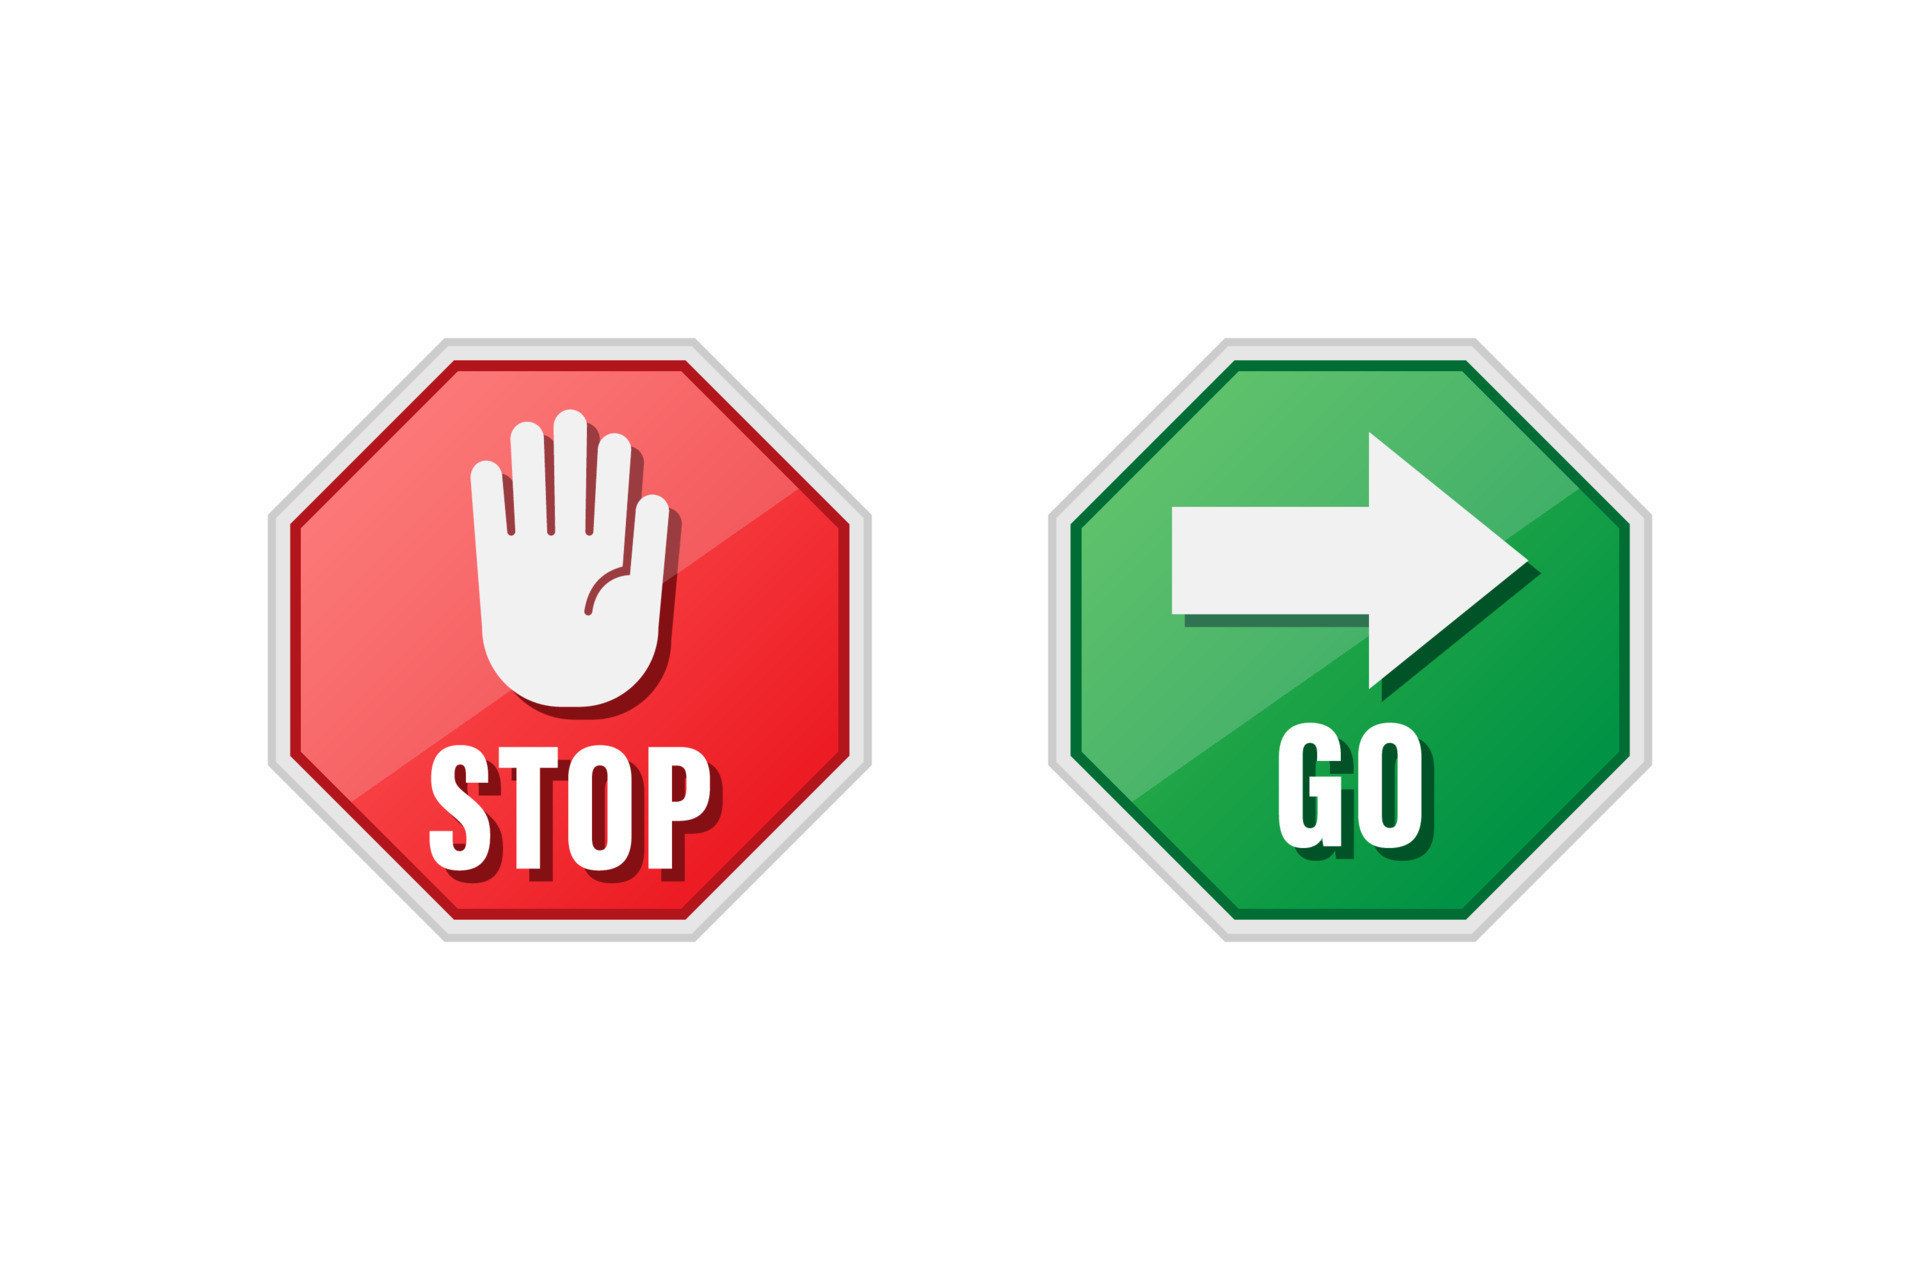 https://static.vecteezy.com/system/resources/previews/009/940/784/original/stop-and-go-sign-icon-design-vector.jpg